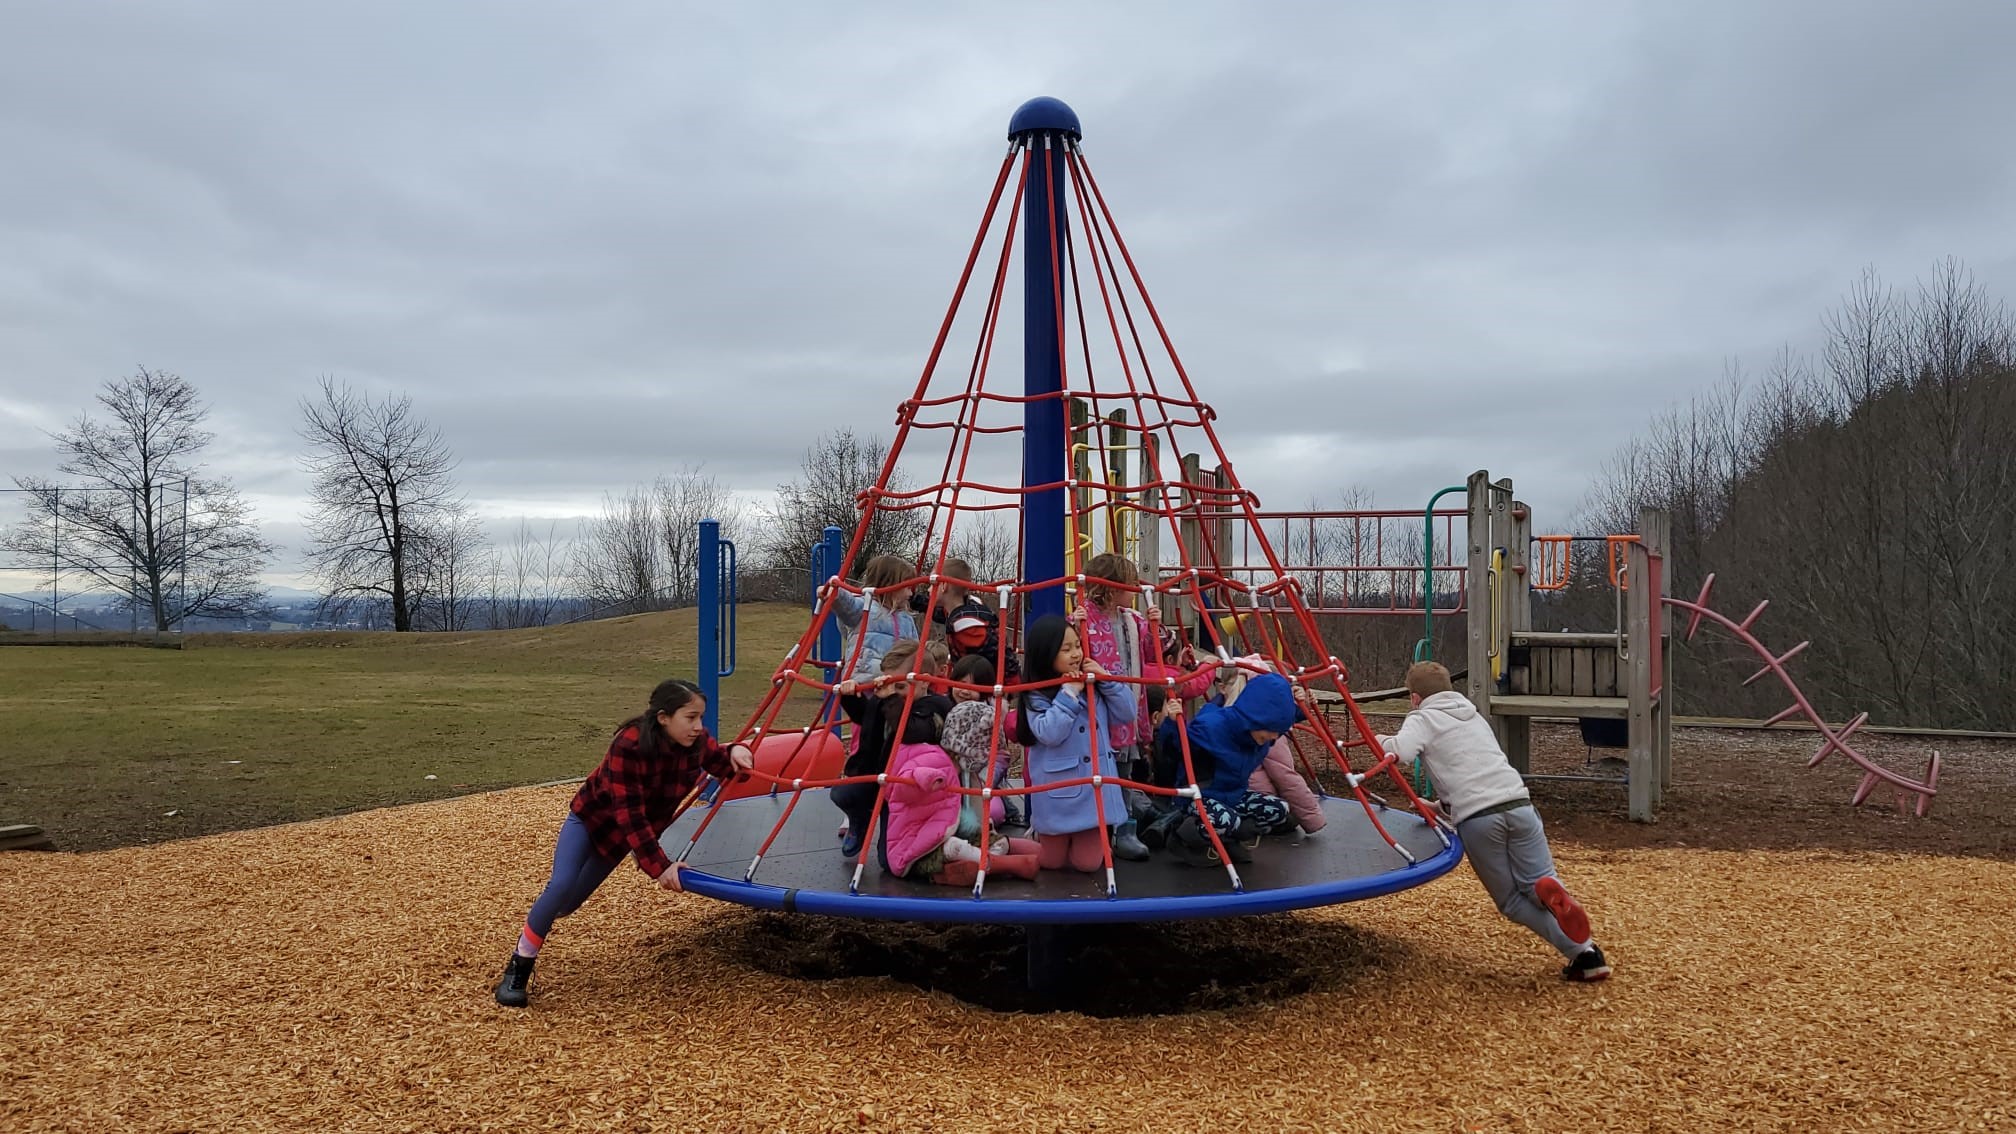 Exploring the World Through Play: How Playgrounds Teach About Cultural Differences